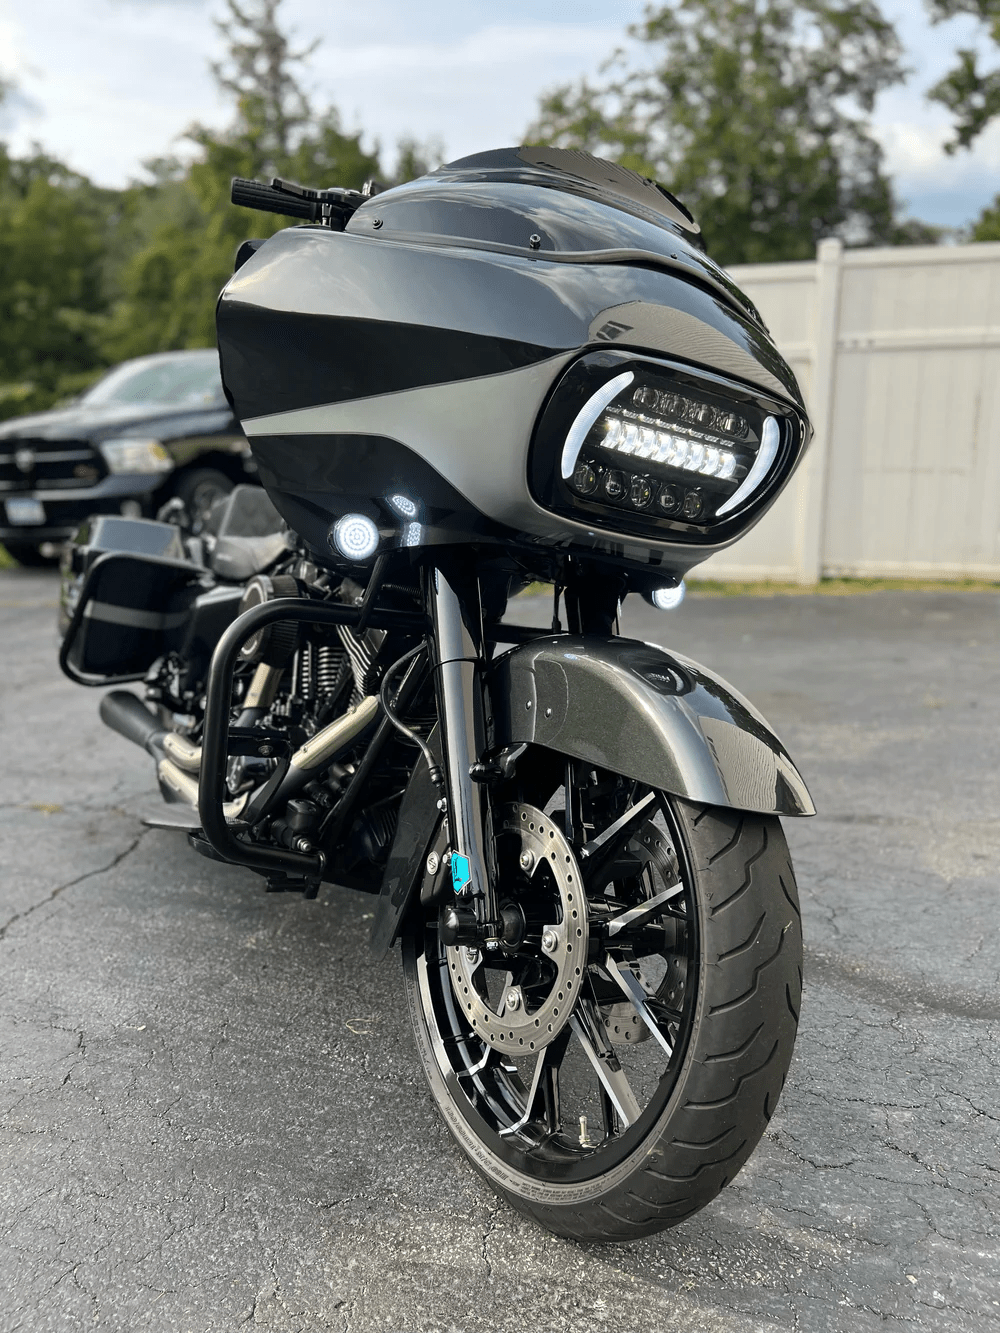 VP Customs Install Our Generation II LED Projection Headlight for 2004 - 2013 Harley Davidson Road Glide